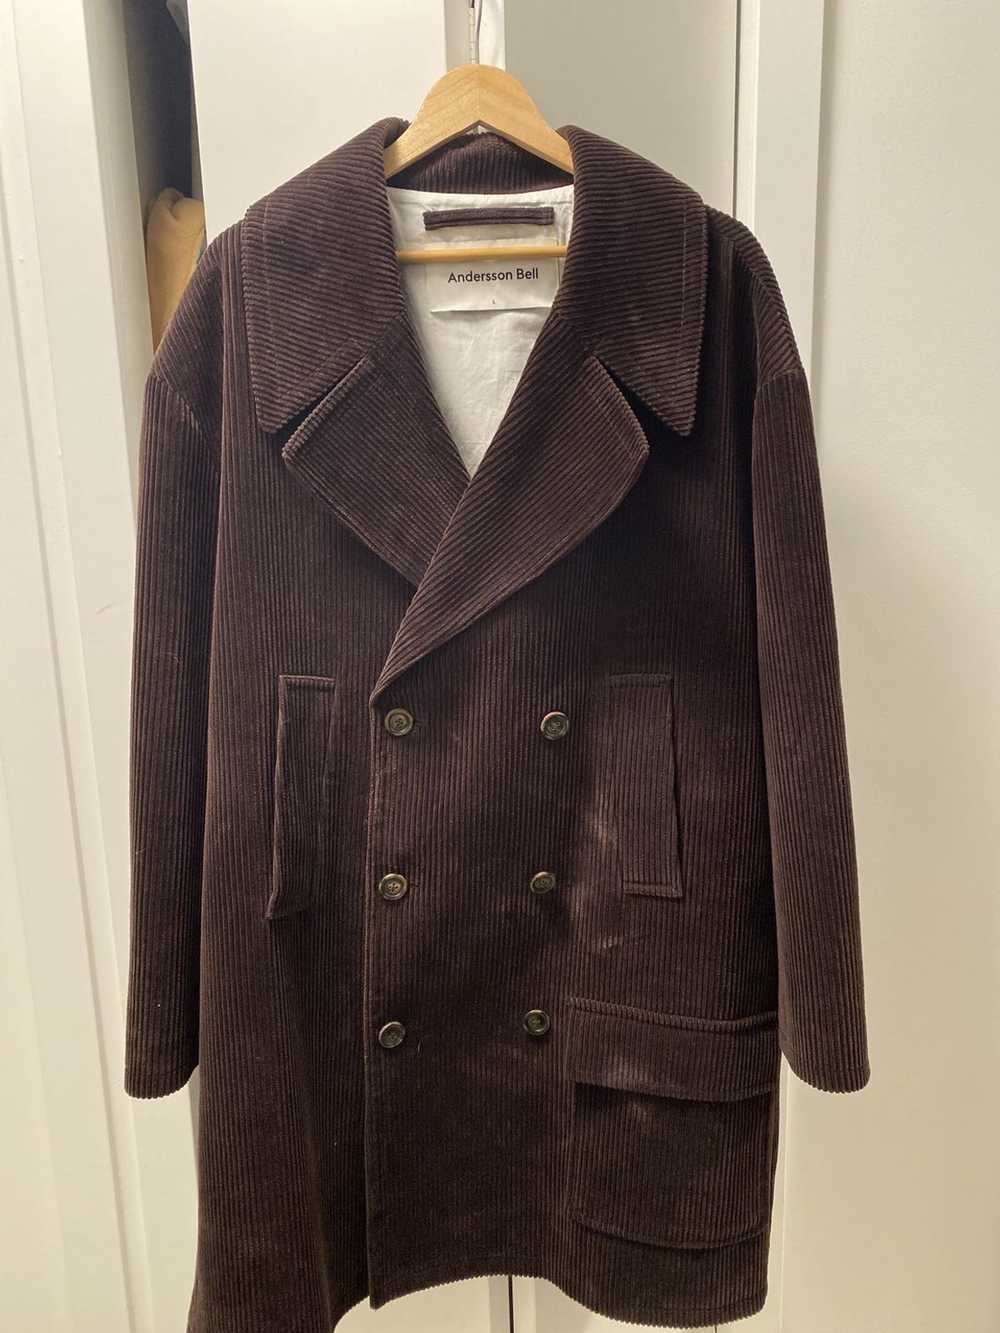 Andersson Bell Anderson Bell FW20 corduroy coat - image 2